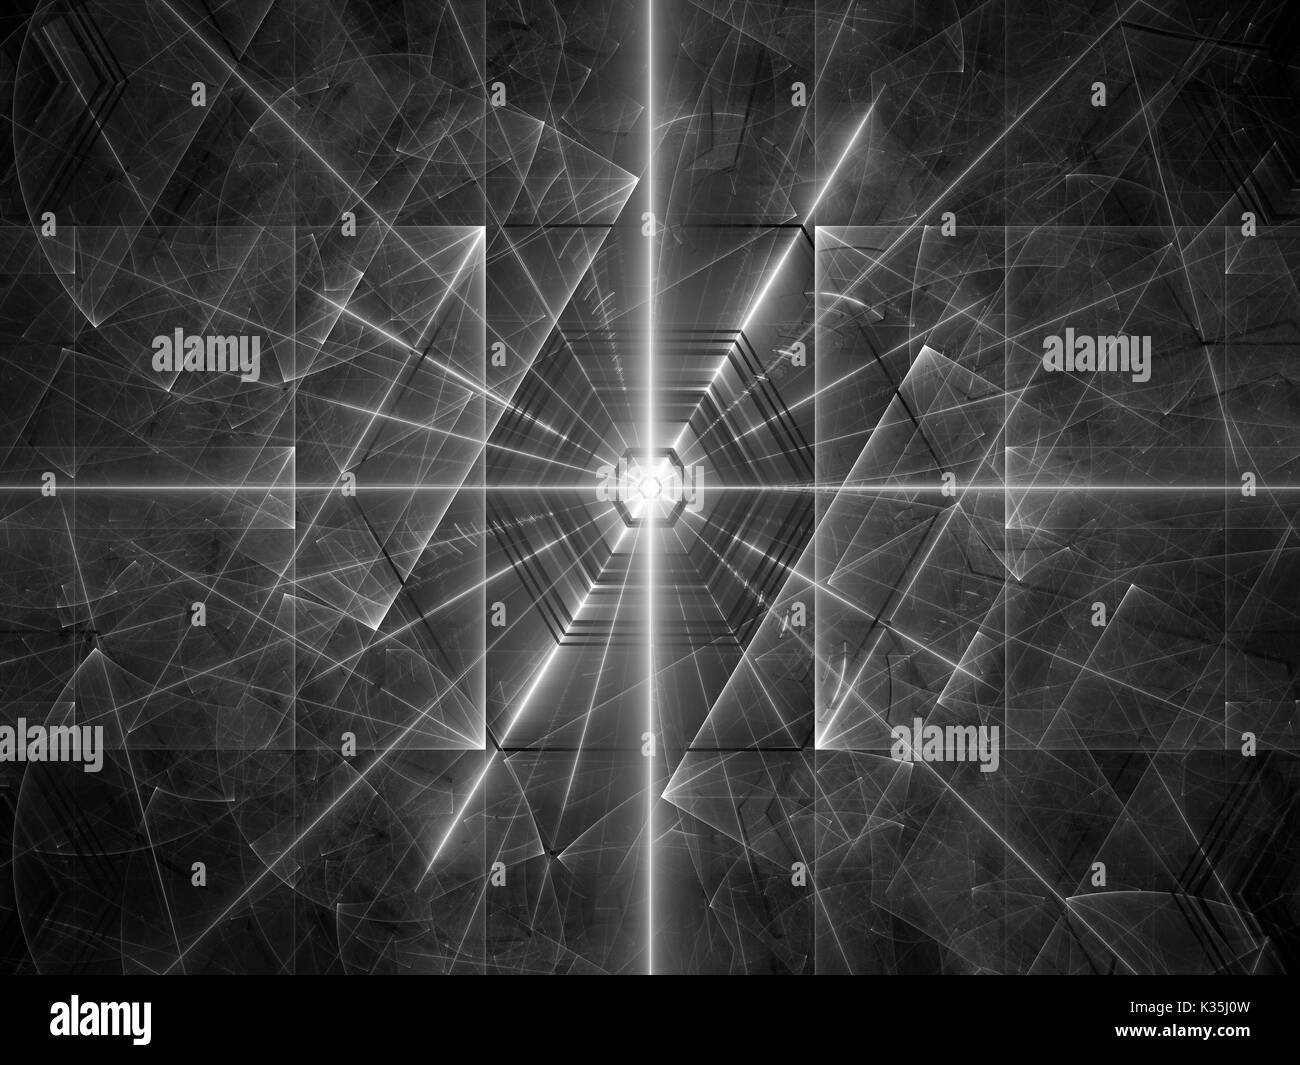 Glowing laser beams texture, black and white, computer generated abstract background, 3D rendering Stock Photo